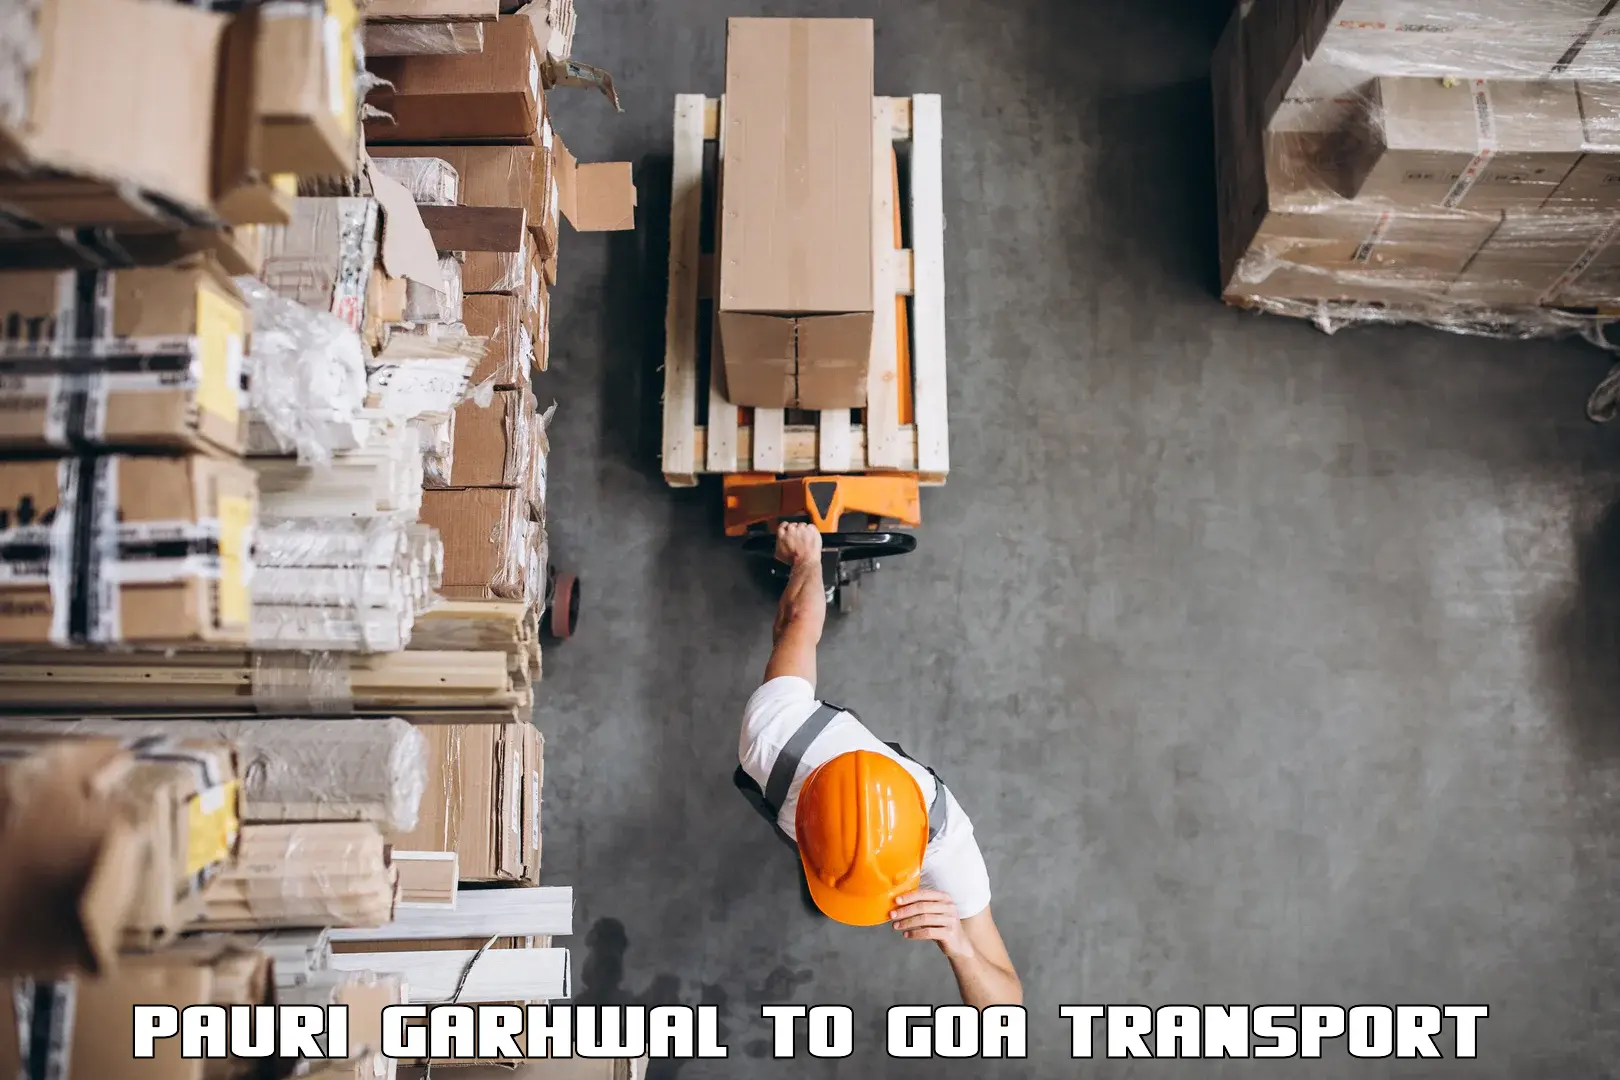 Daily parcel service transport Pauri Garhwal to IIT Goa